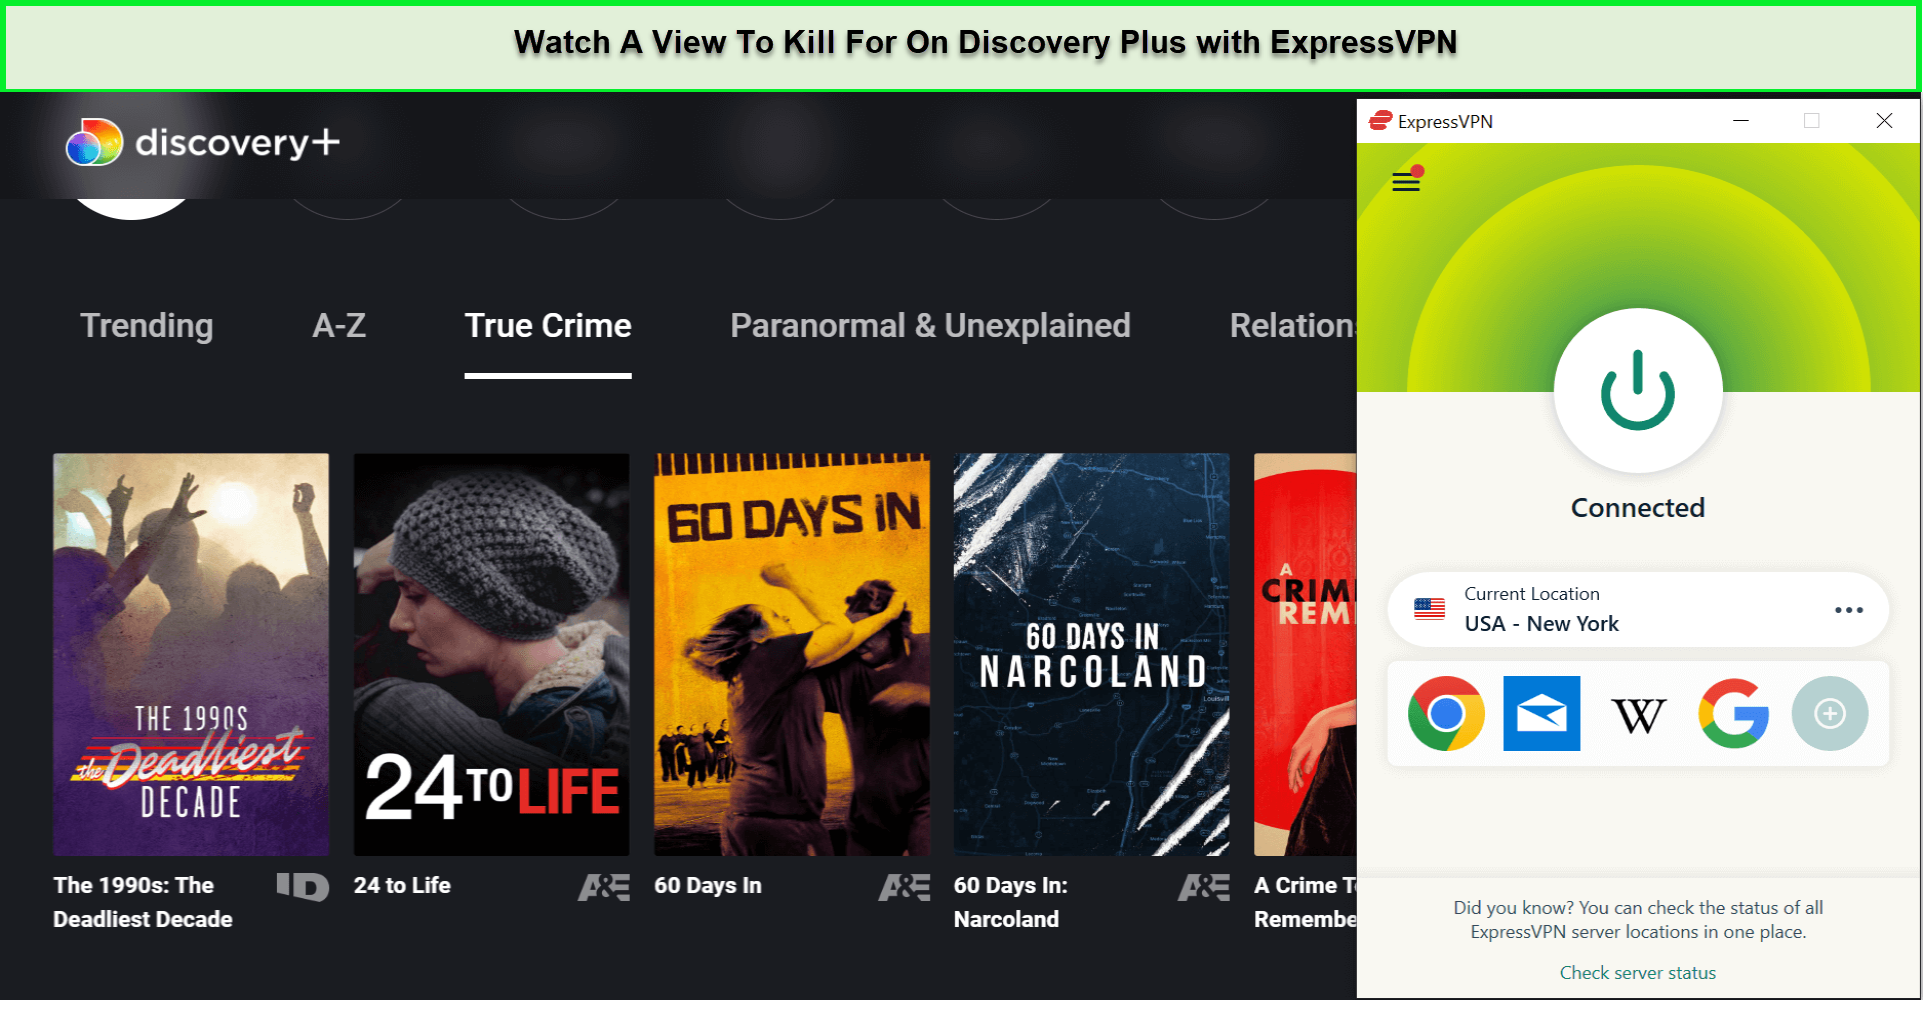 Watch-A-View-To-Kill-For-in-Singapore-On-Discovery-Plus-with-ExpressVPN